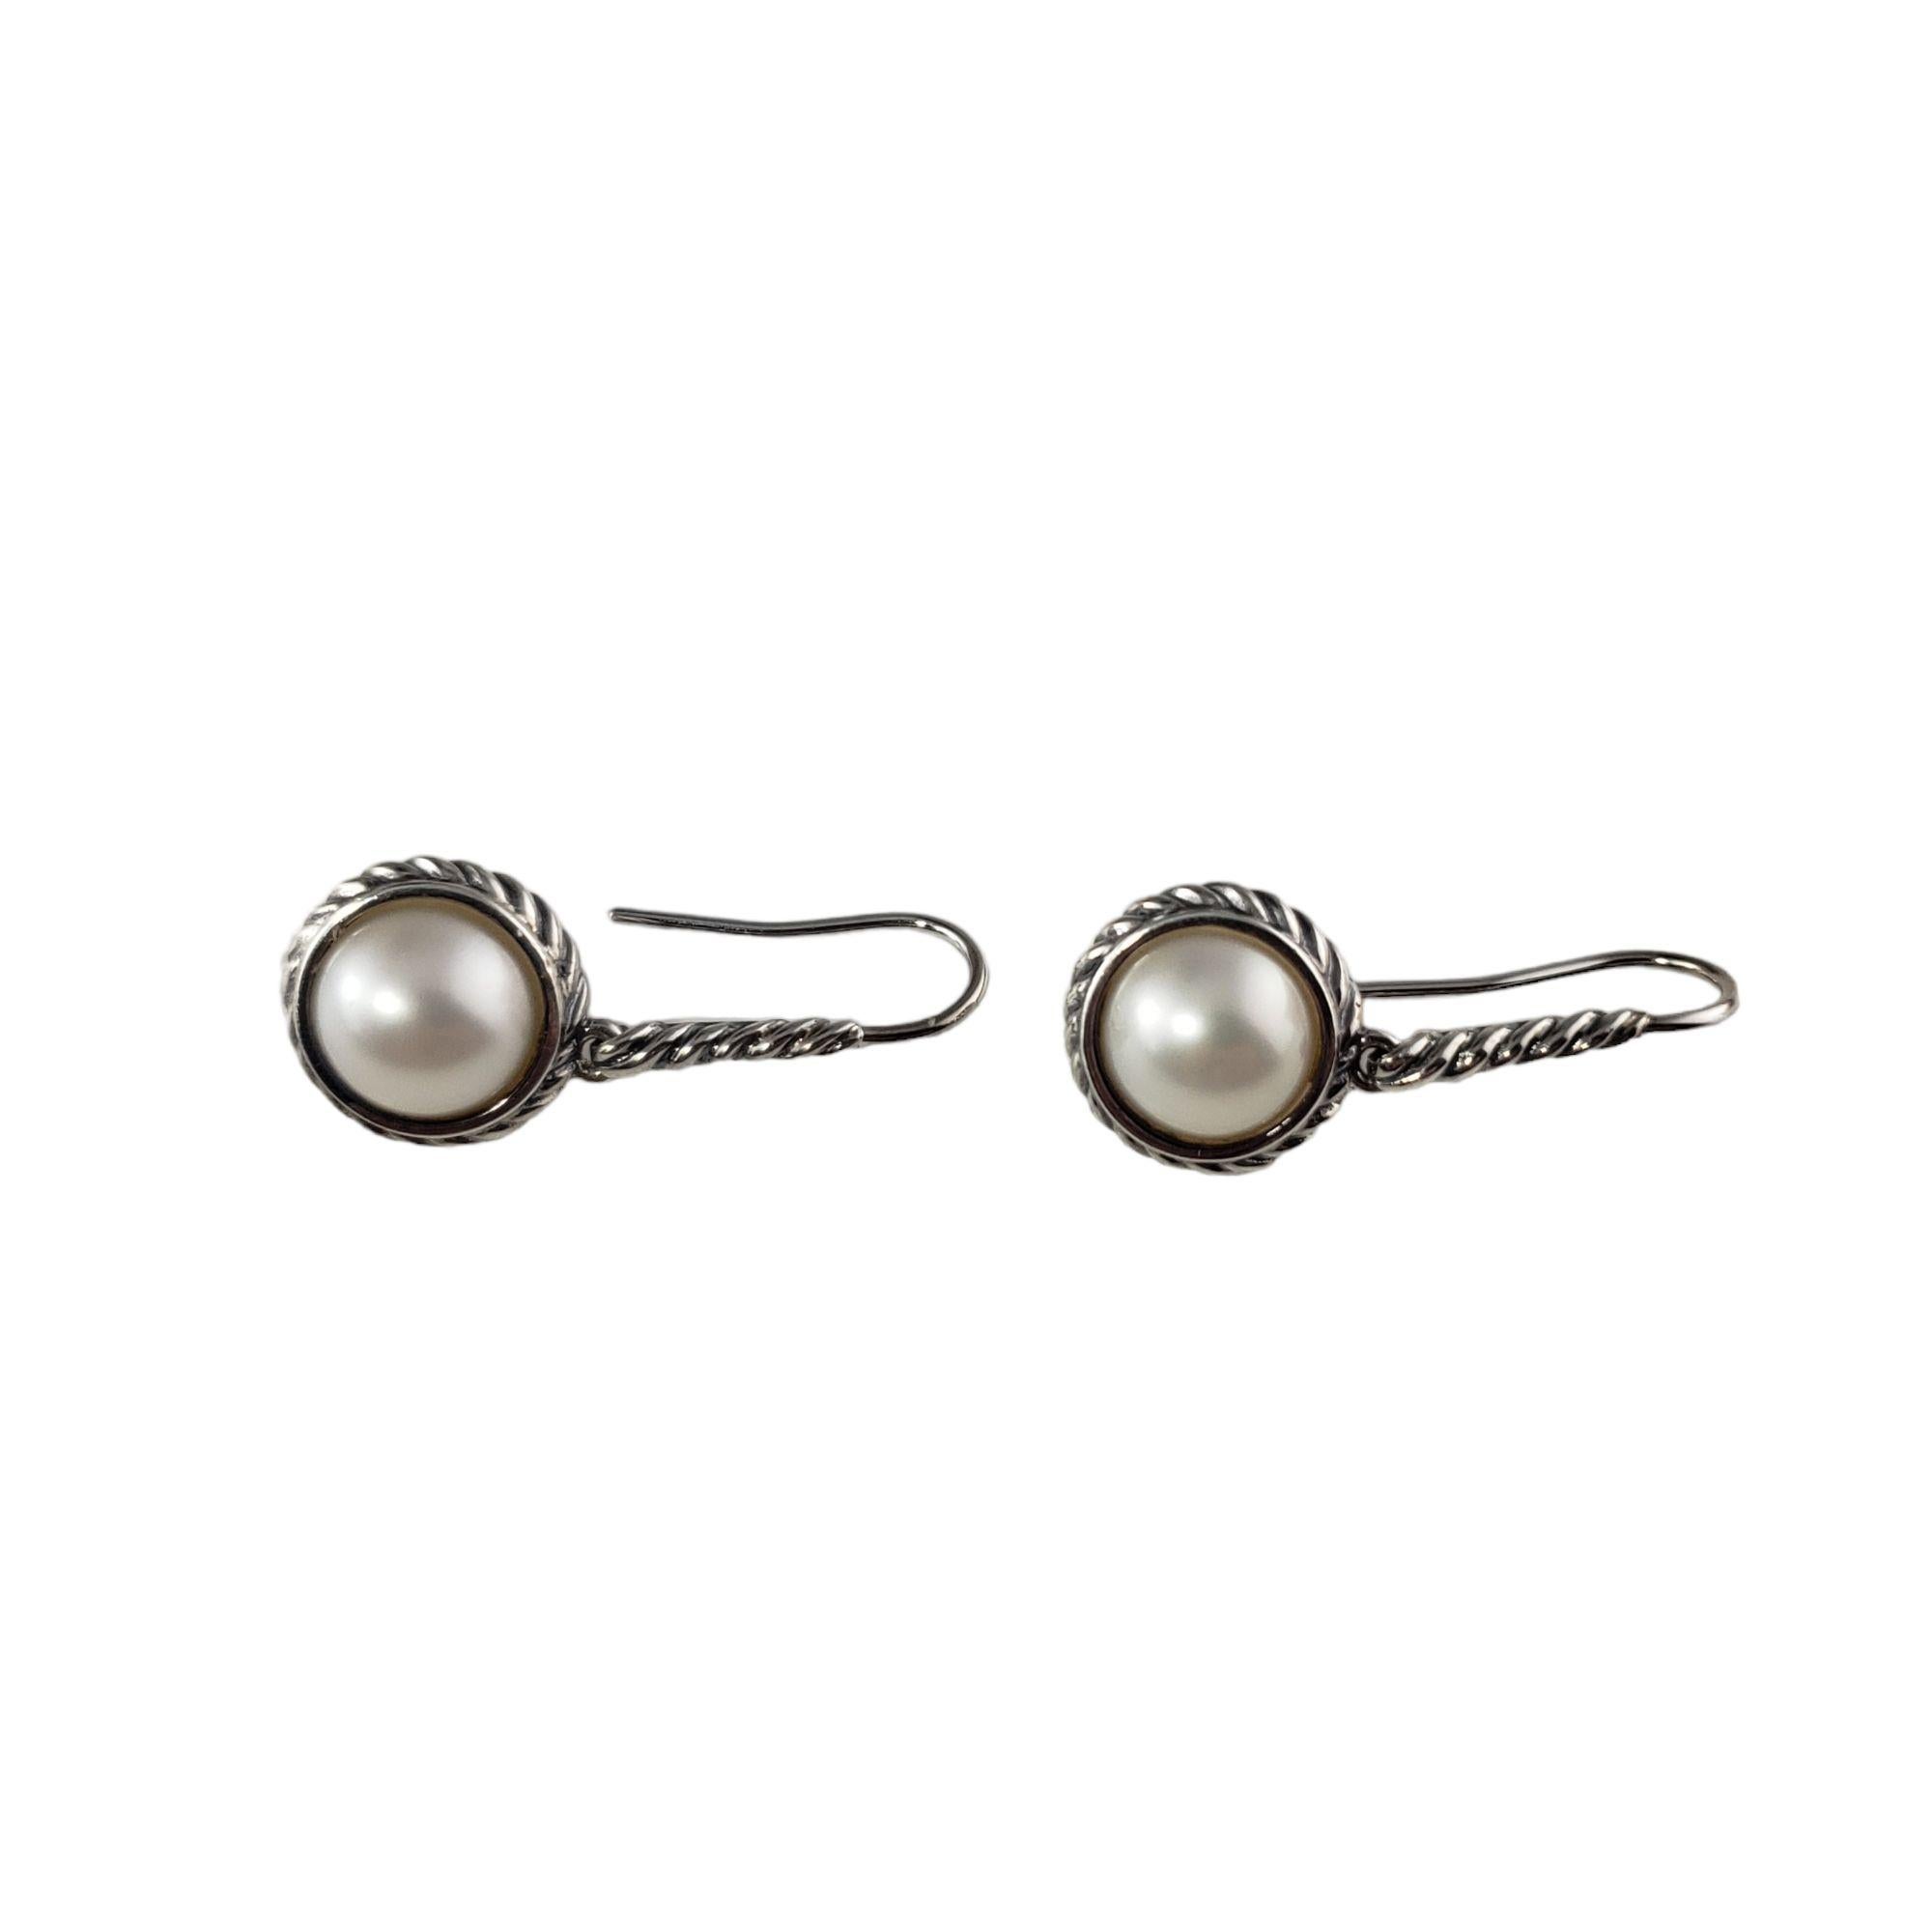 Vintage David Yurman Sterling Silver Cable Pearl Drop Earrings-

These elegant drop earrings by David Yurman each feature one 9 mm pearl set in beautifully detailed sterling silver.

Size: 17 mm x 9 mm

Weight: 3.5 gr./ 5.0 dwt.

Hallmark: D.Y.